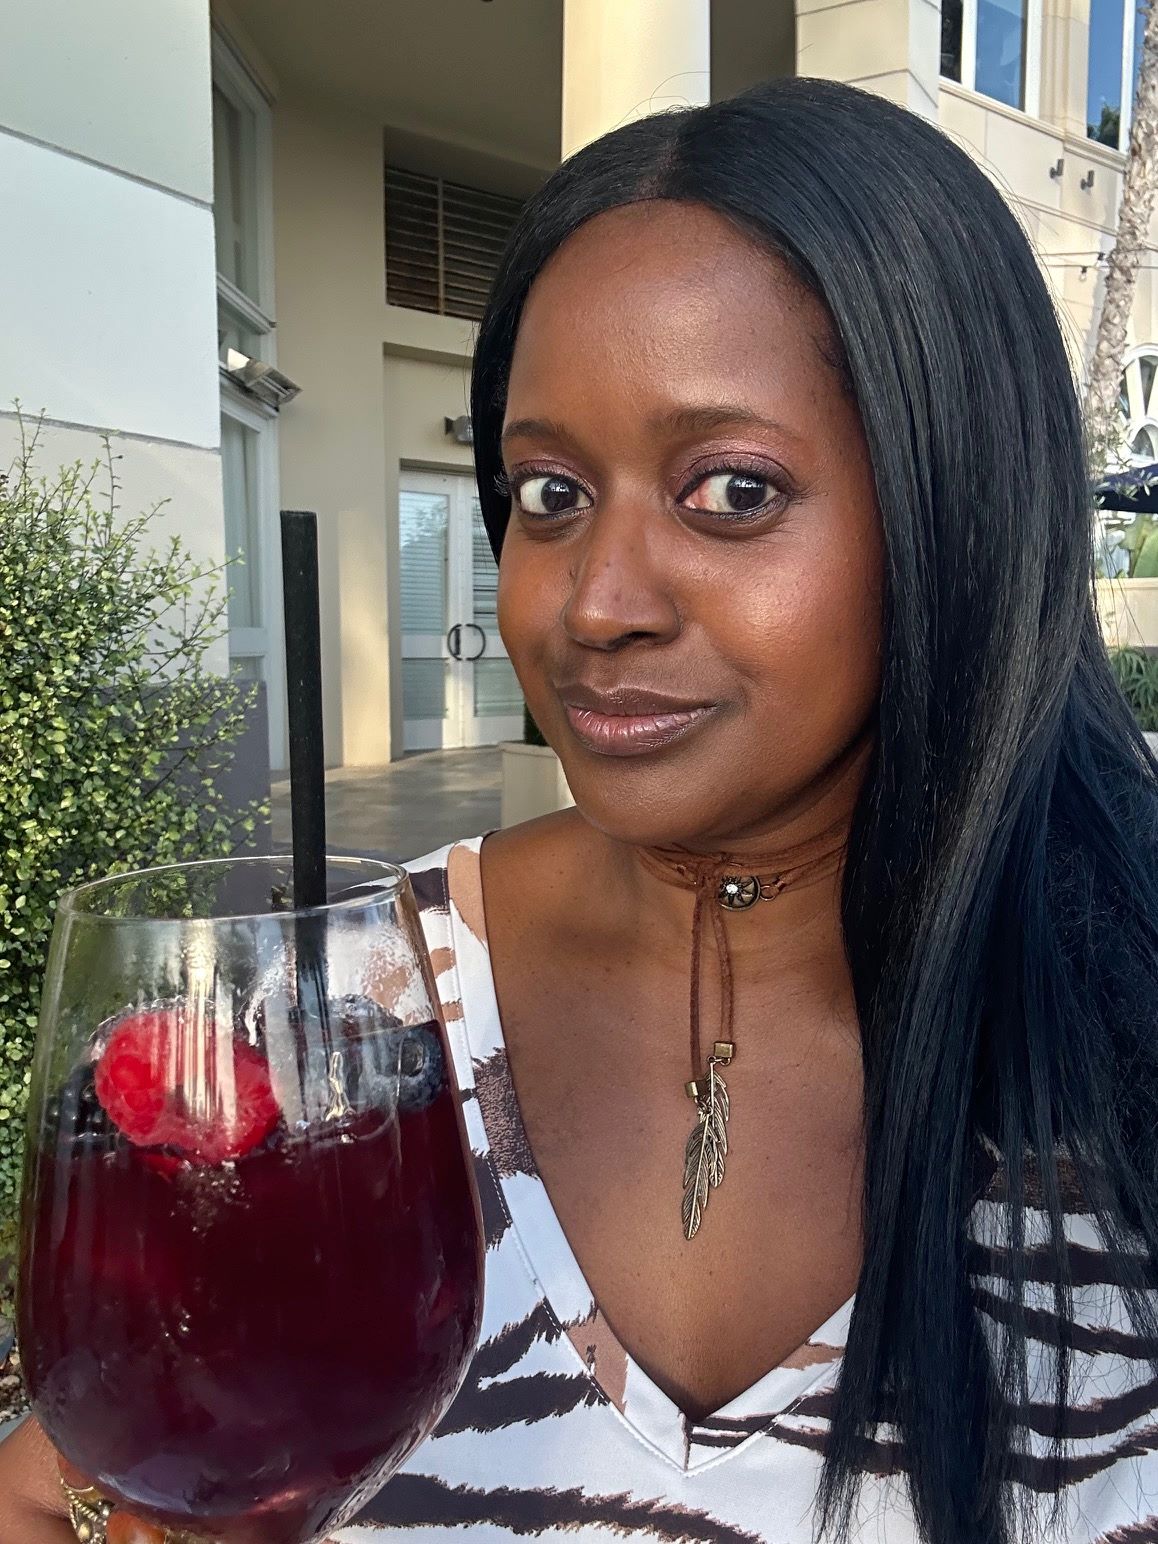 An image of Ariel holding a glass of Red Sangria.